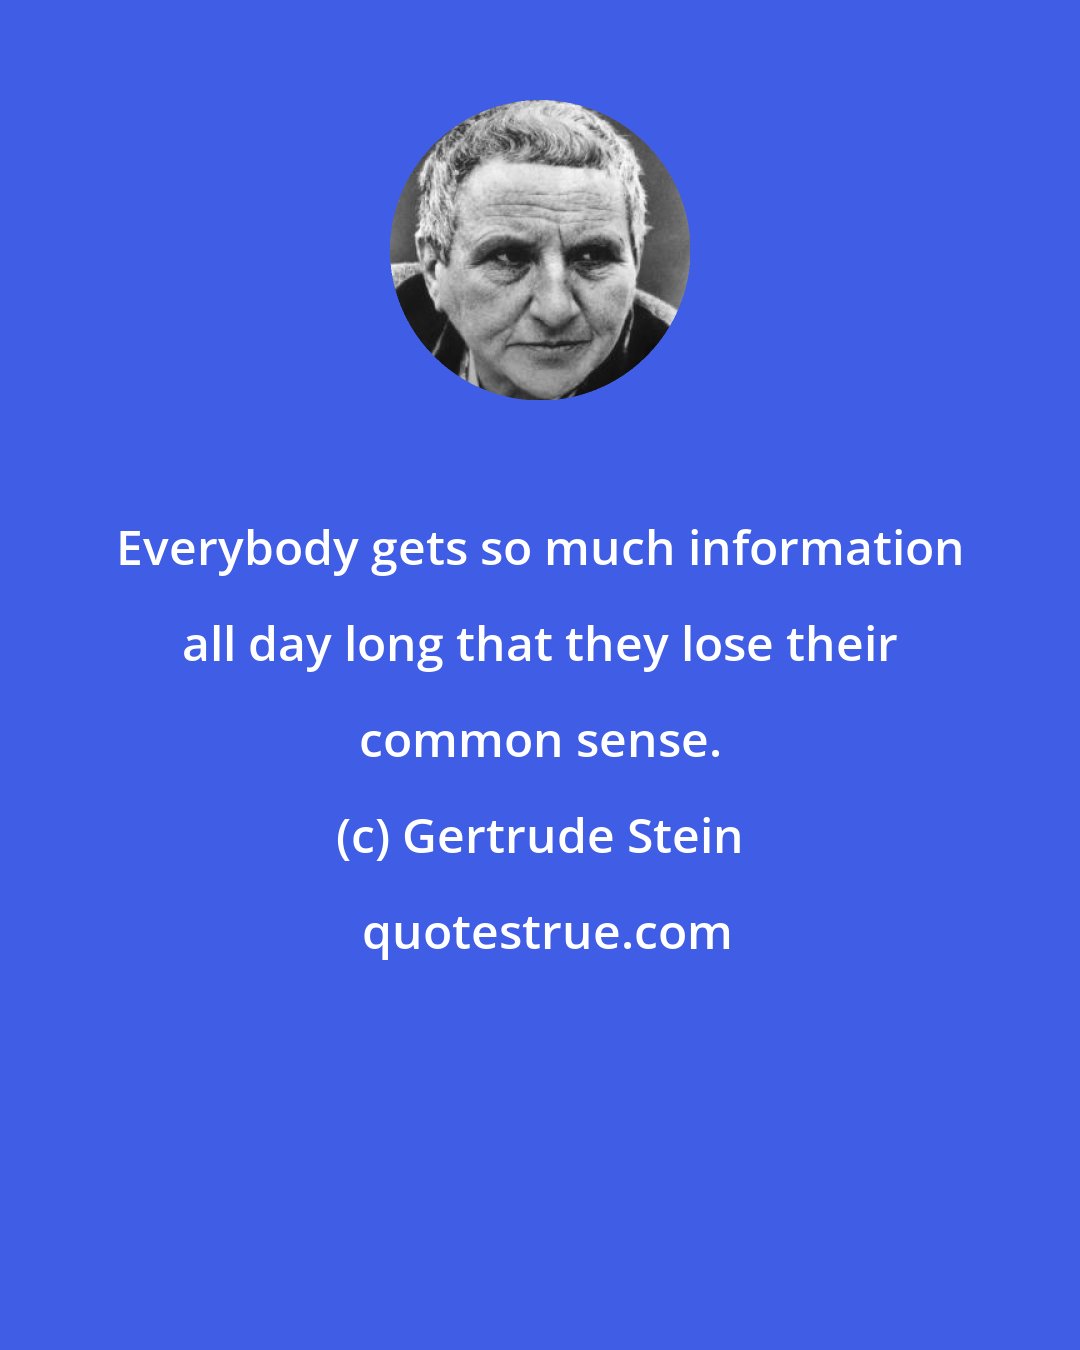 Gertrude Stein: Everybody gets so much information all day long that they lose their common sense.